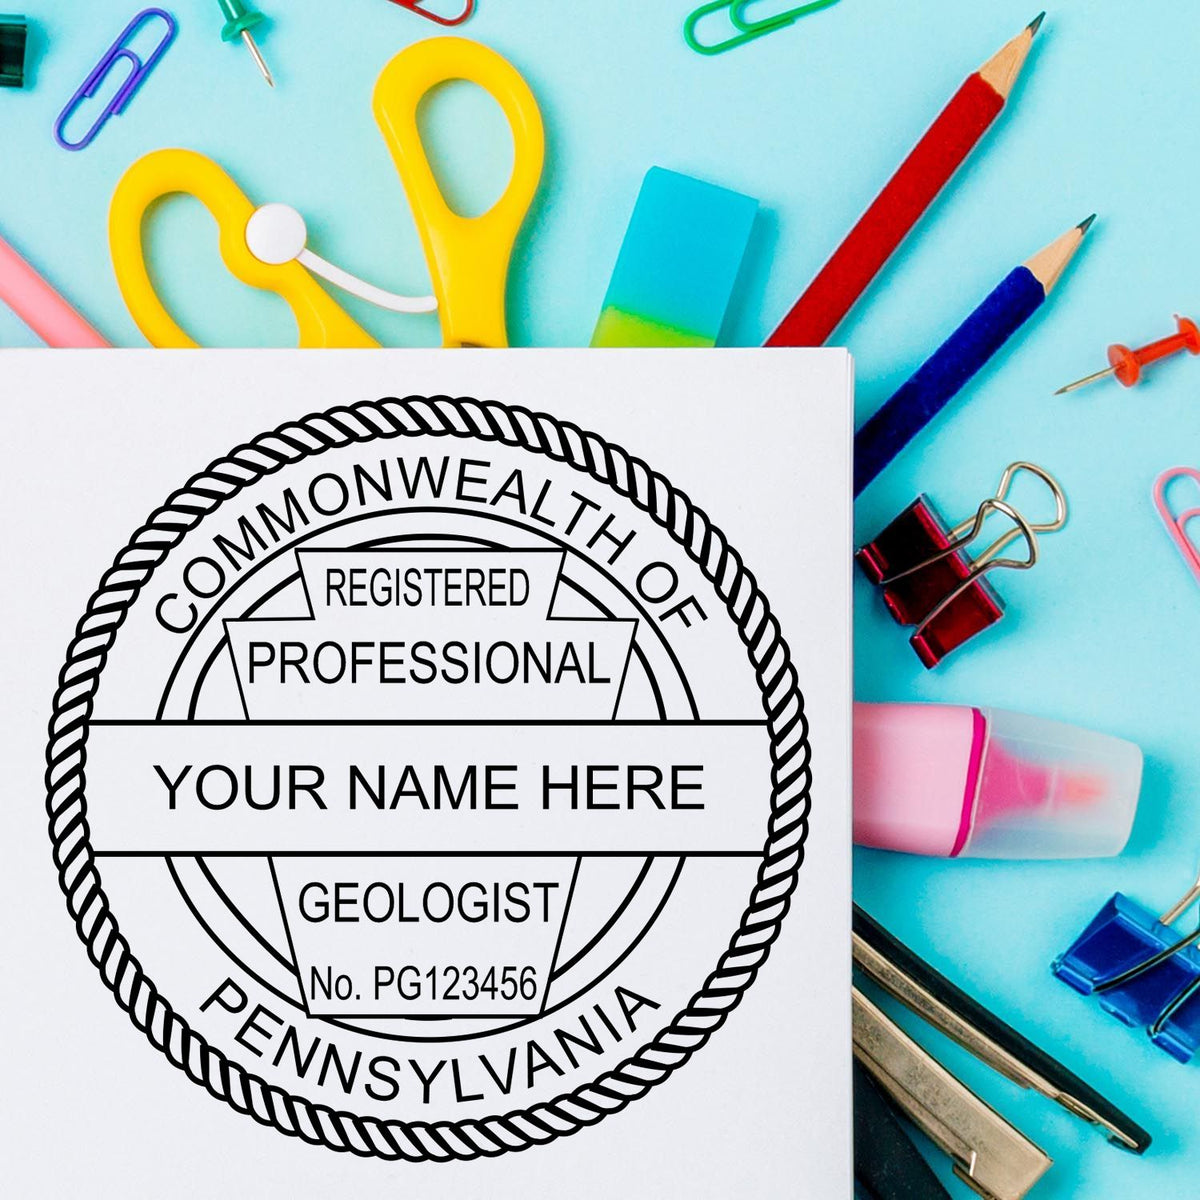 A stamped imprint of the Digital Pennsylvania Geologist Stamp, Electronic Seal for Pennsylvania Geologist in this stylish lifestyle photo, setting the tone for a unique and personalized product.